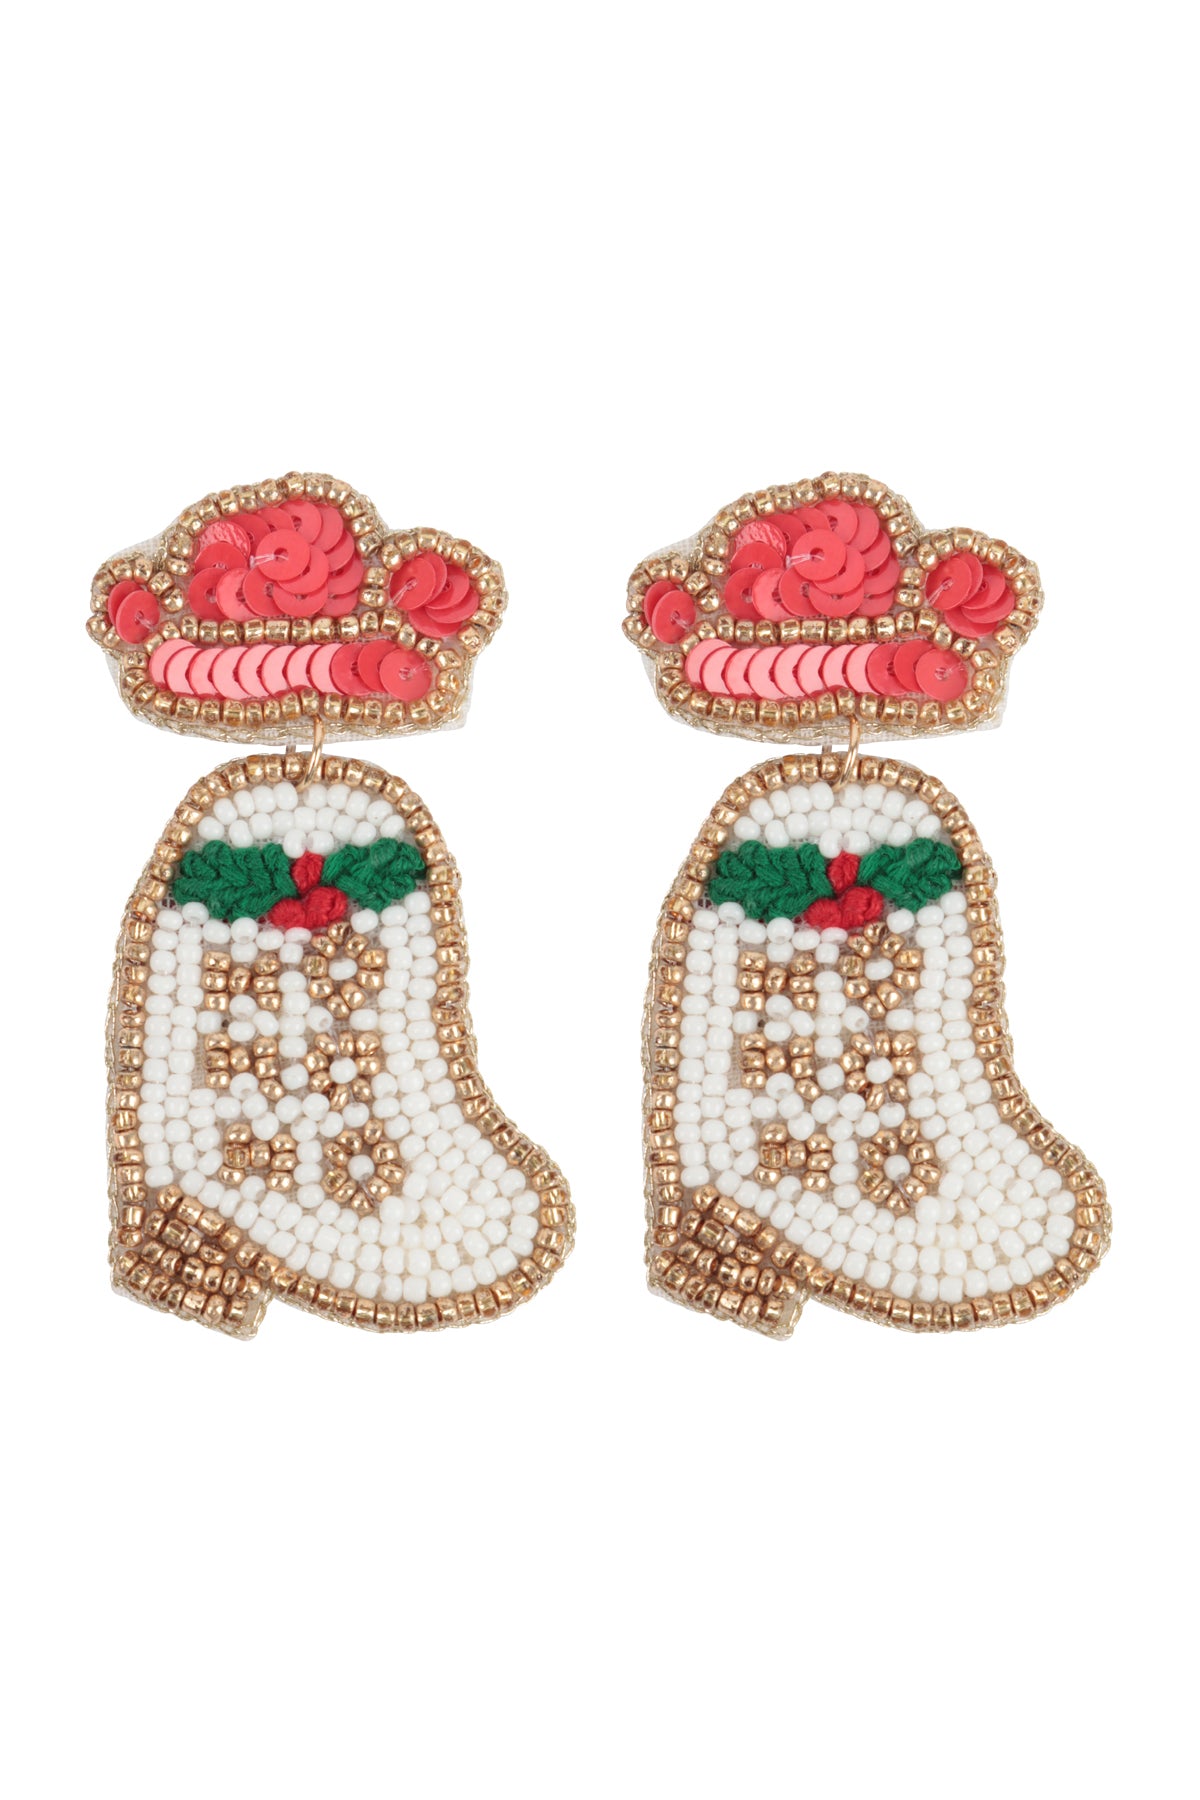 CHRISTMAS COWGIRL BOOTS SEED BEADS DROP EARRINGS-MULTICOLOR